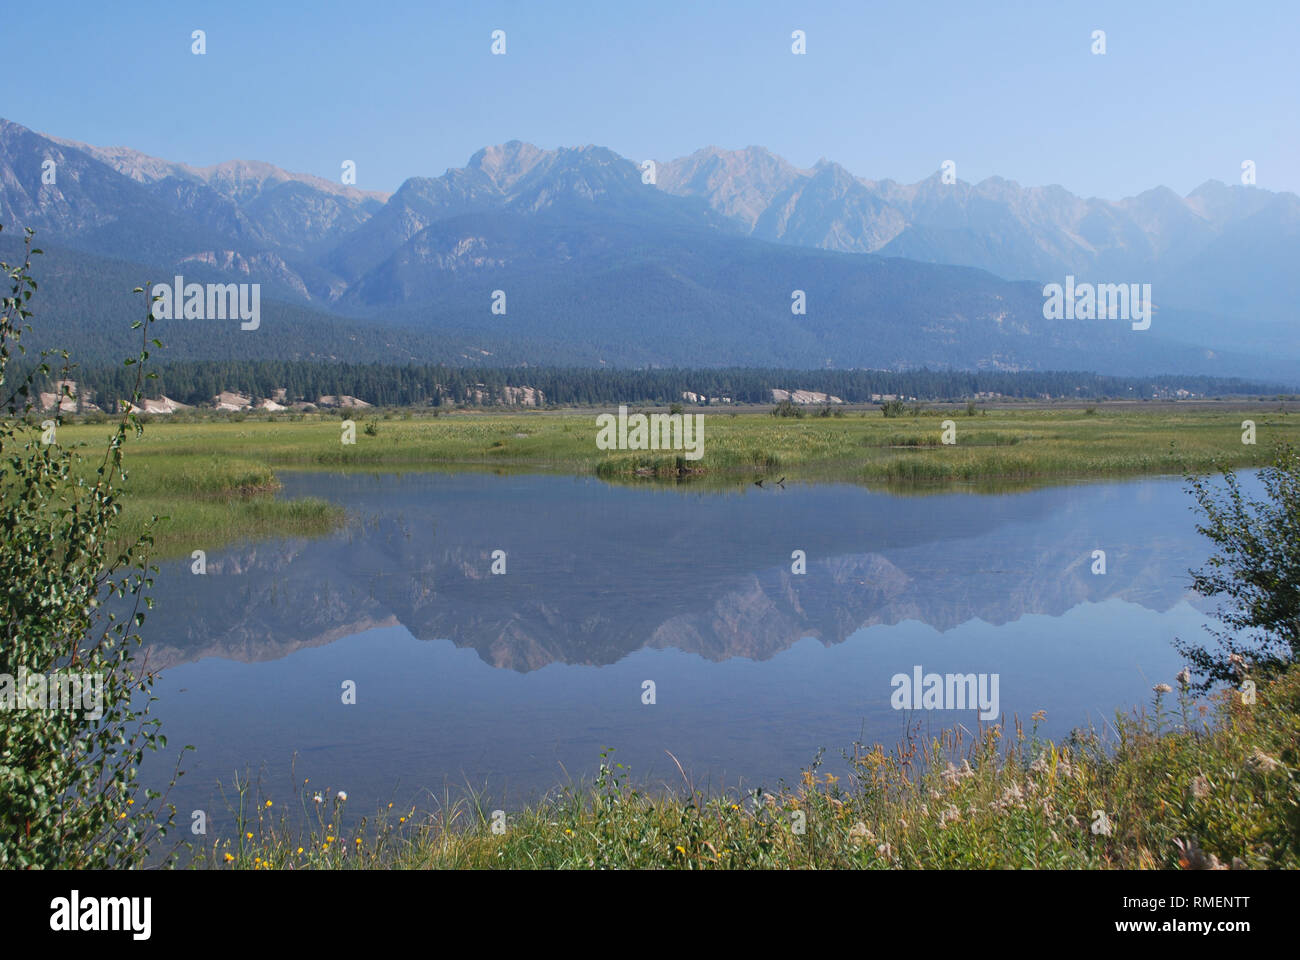 Reflection of the Rockies in the headwaters of the Columbia River in southeastern British Columbia add to the beauty of this important wetland. Stock Photo